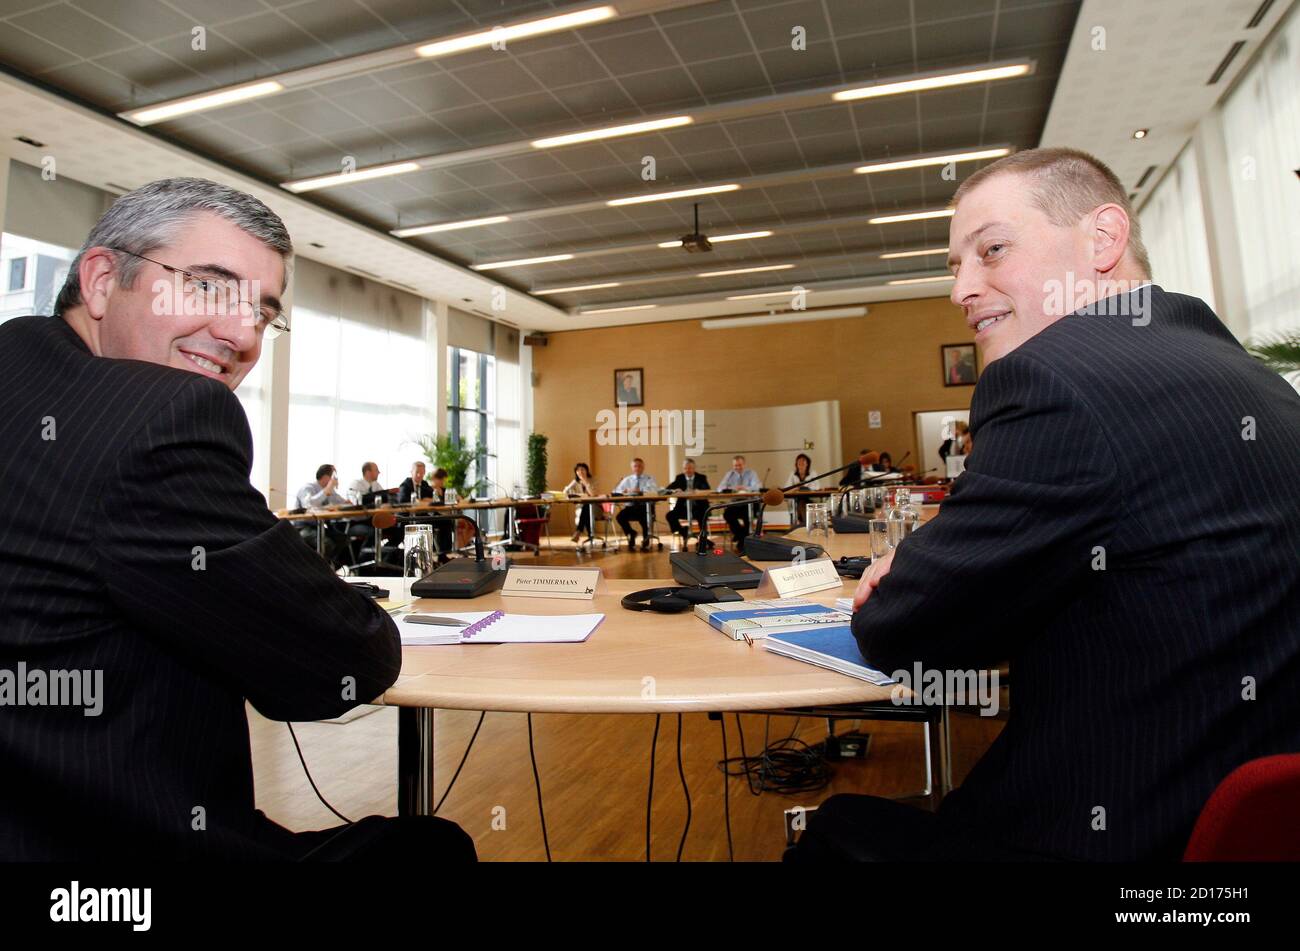 Belgium's Enterprises Federation VBO-FEB Director-General Pieter Timmermans (L) and Flanders Small and Medium-sized Enterprises Federation UNIZO Chairman Karel Van Eetveld attend a meeting between the government and 'Group of 10' in Brussels May 23, 2008. The meeting with the 'Group of 10', which is made up of trade and professional unions, focused on economic and social issues in the country. REUTERS/Sebastian Pirlet (BELGIUM) Stock Photo